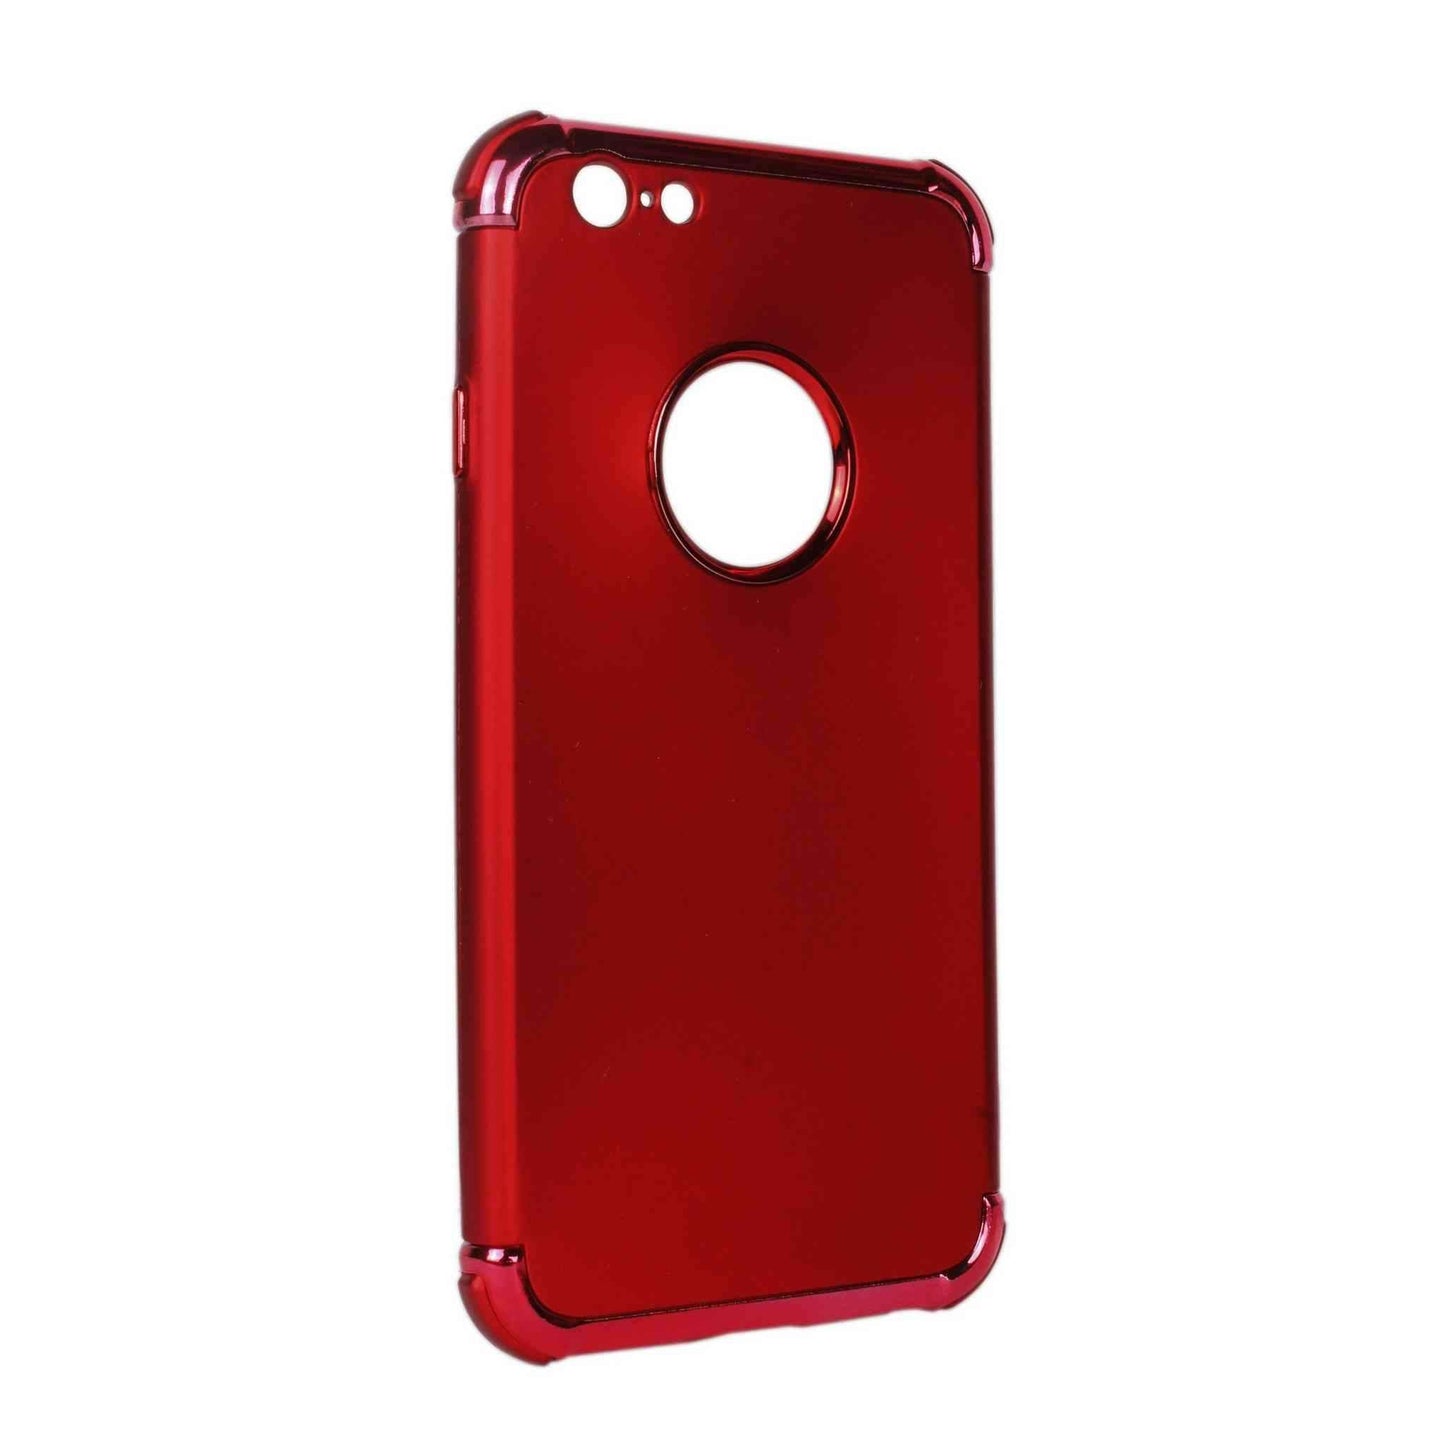 Indian Petals Polycarbonate Electro-plated Shock-proof Anti-scratch Protective Mobile Back Case Cover for Apple iPhone 6, Red - Indian Petals